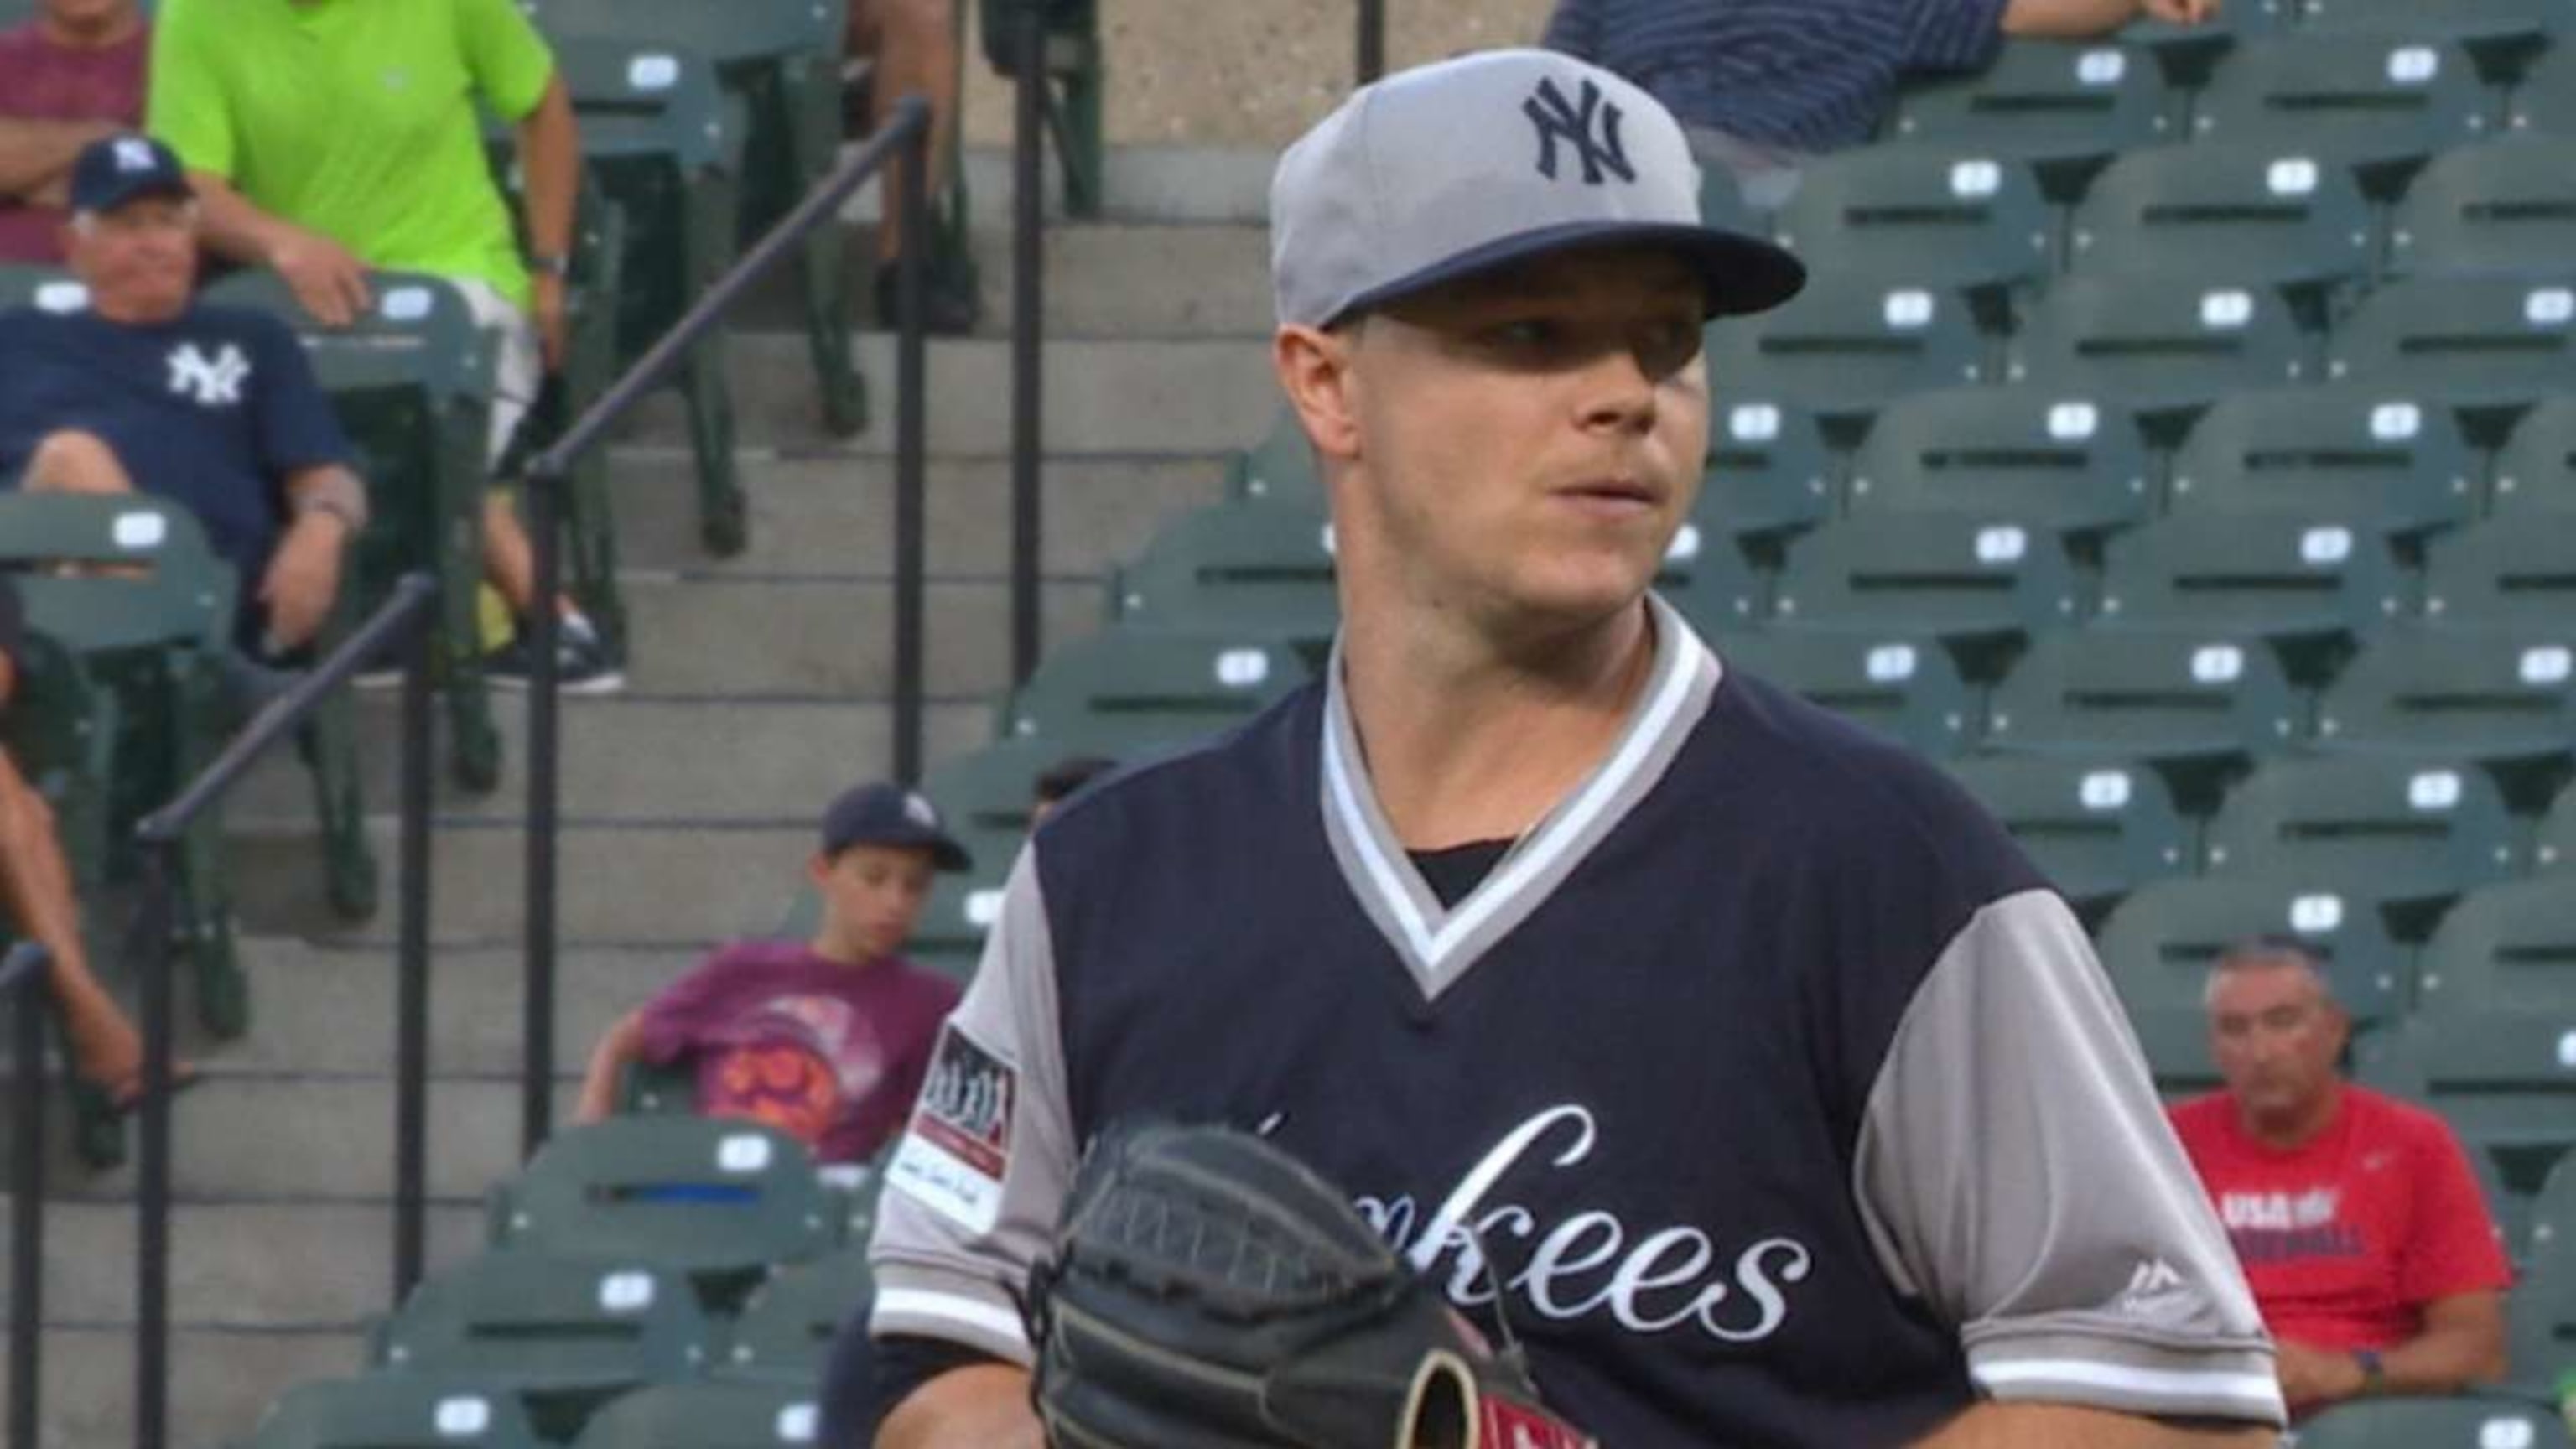 Yankees Hope Their New Acquisition Sonny Gray Is a Bargain - The